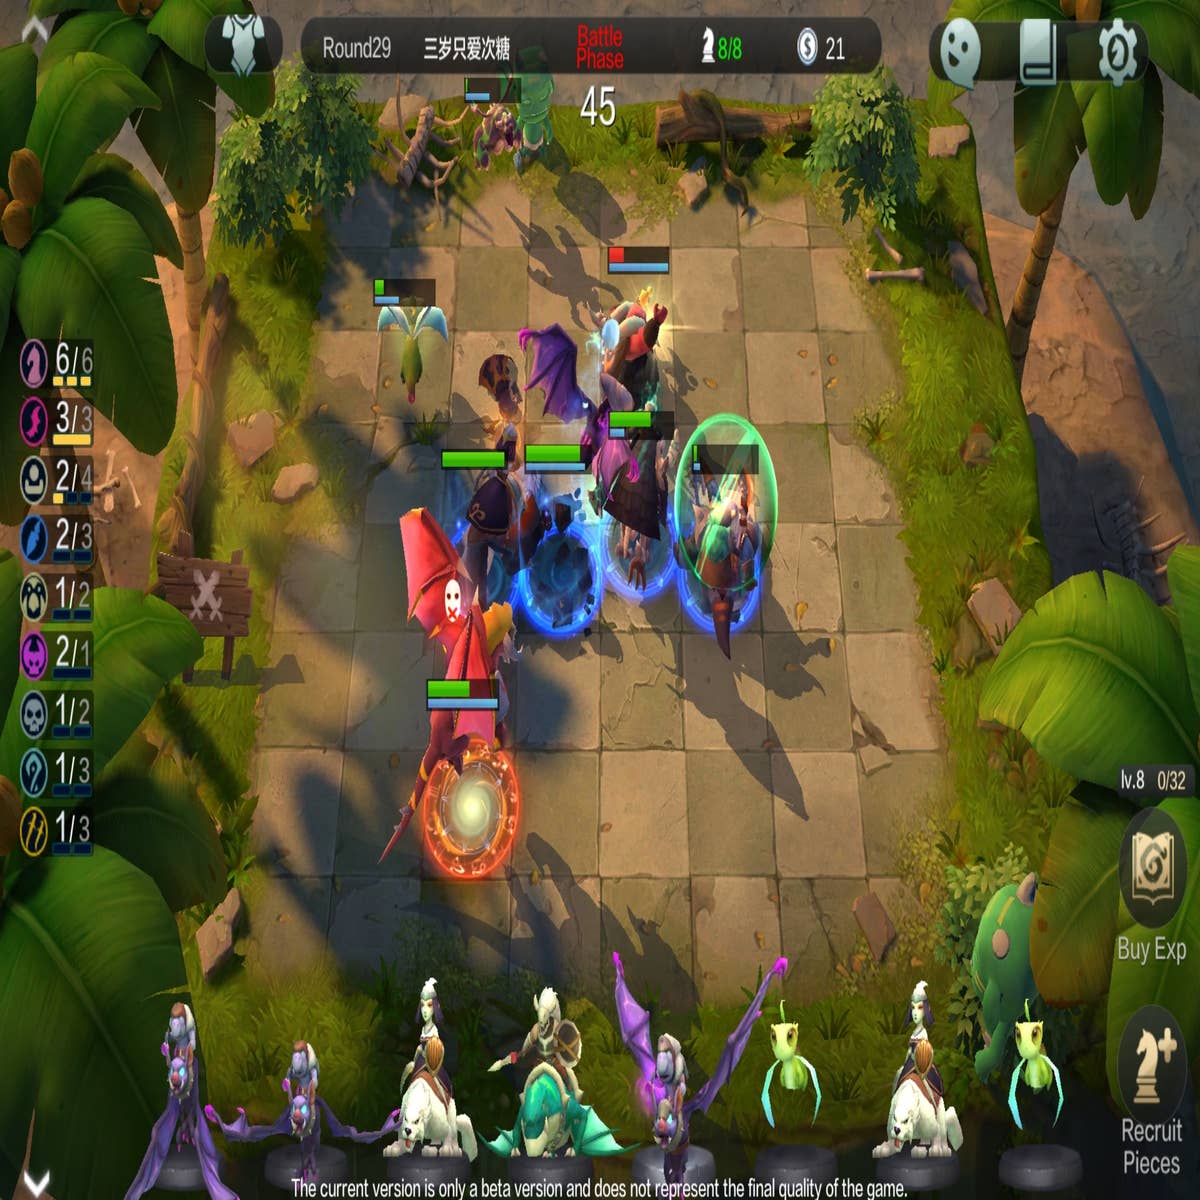 Auto-Chess Comes To Mobile Without Dota Involvement - Game Informer